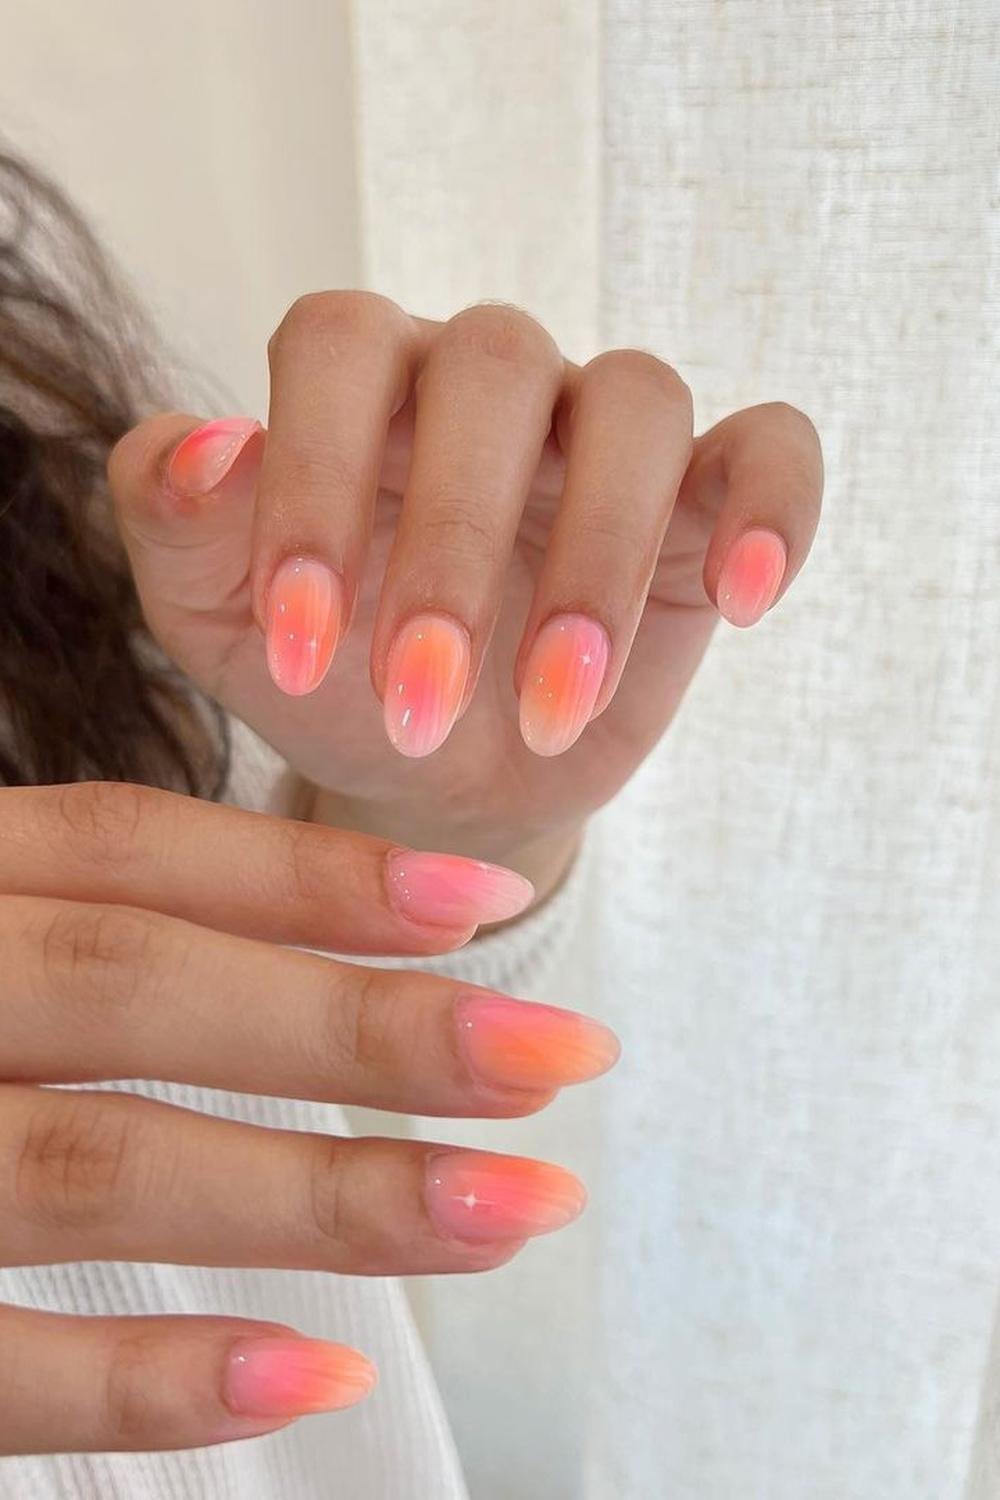 10 - Picture of Pink and Orange Nails